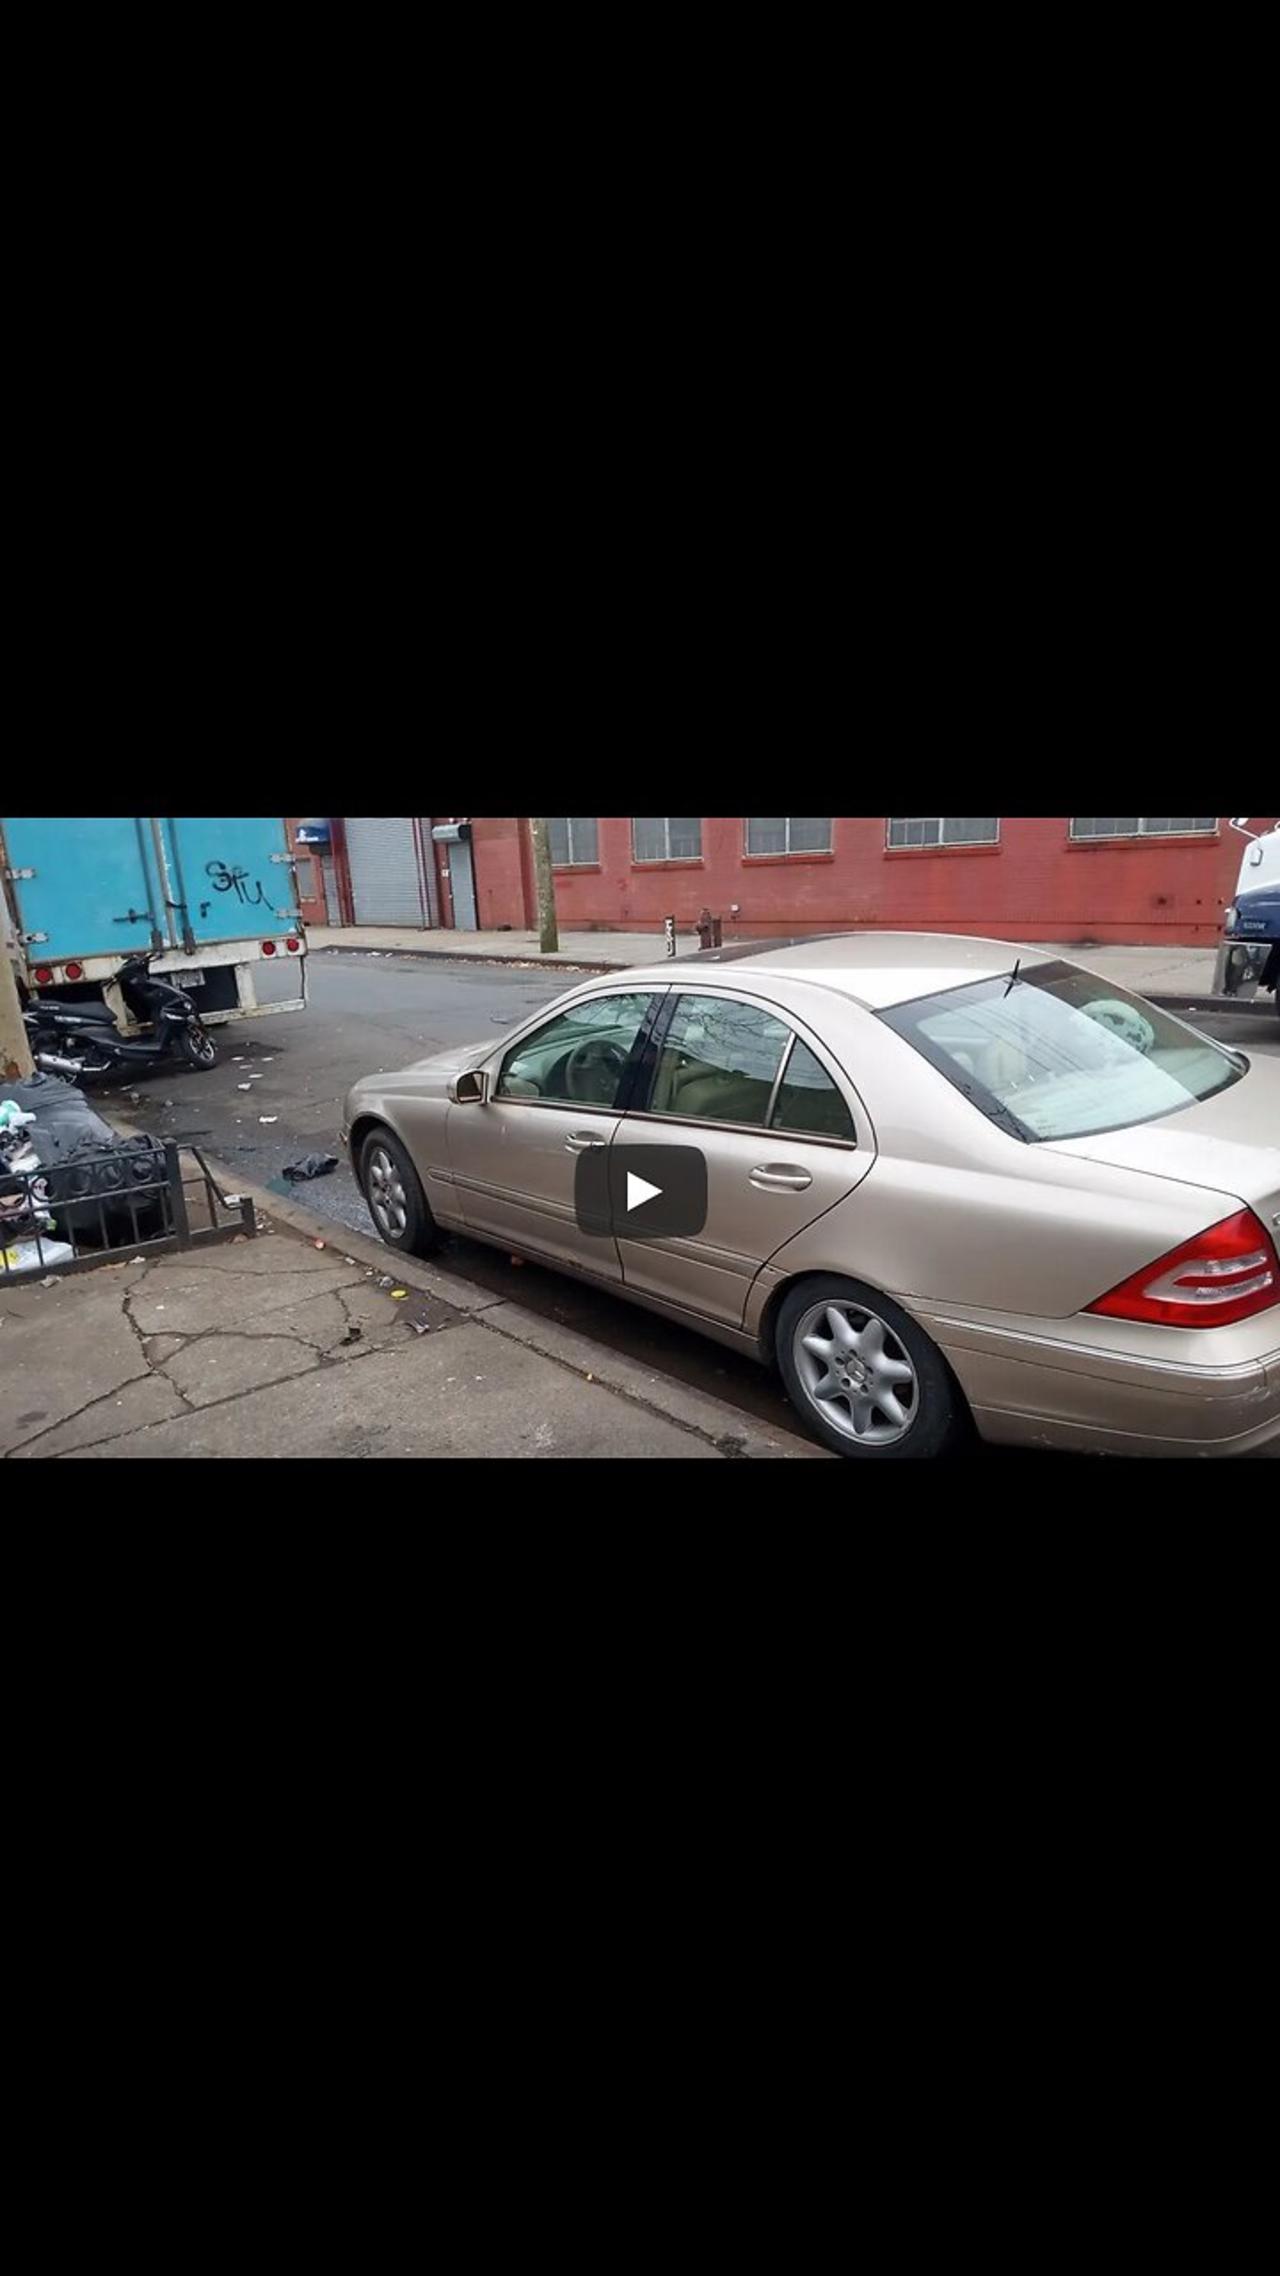 NYC Migrants Bought a Mercedes Benz With Your Taxpayers Dollars 💵 & Squatting in my uncles Trailer